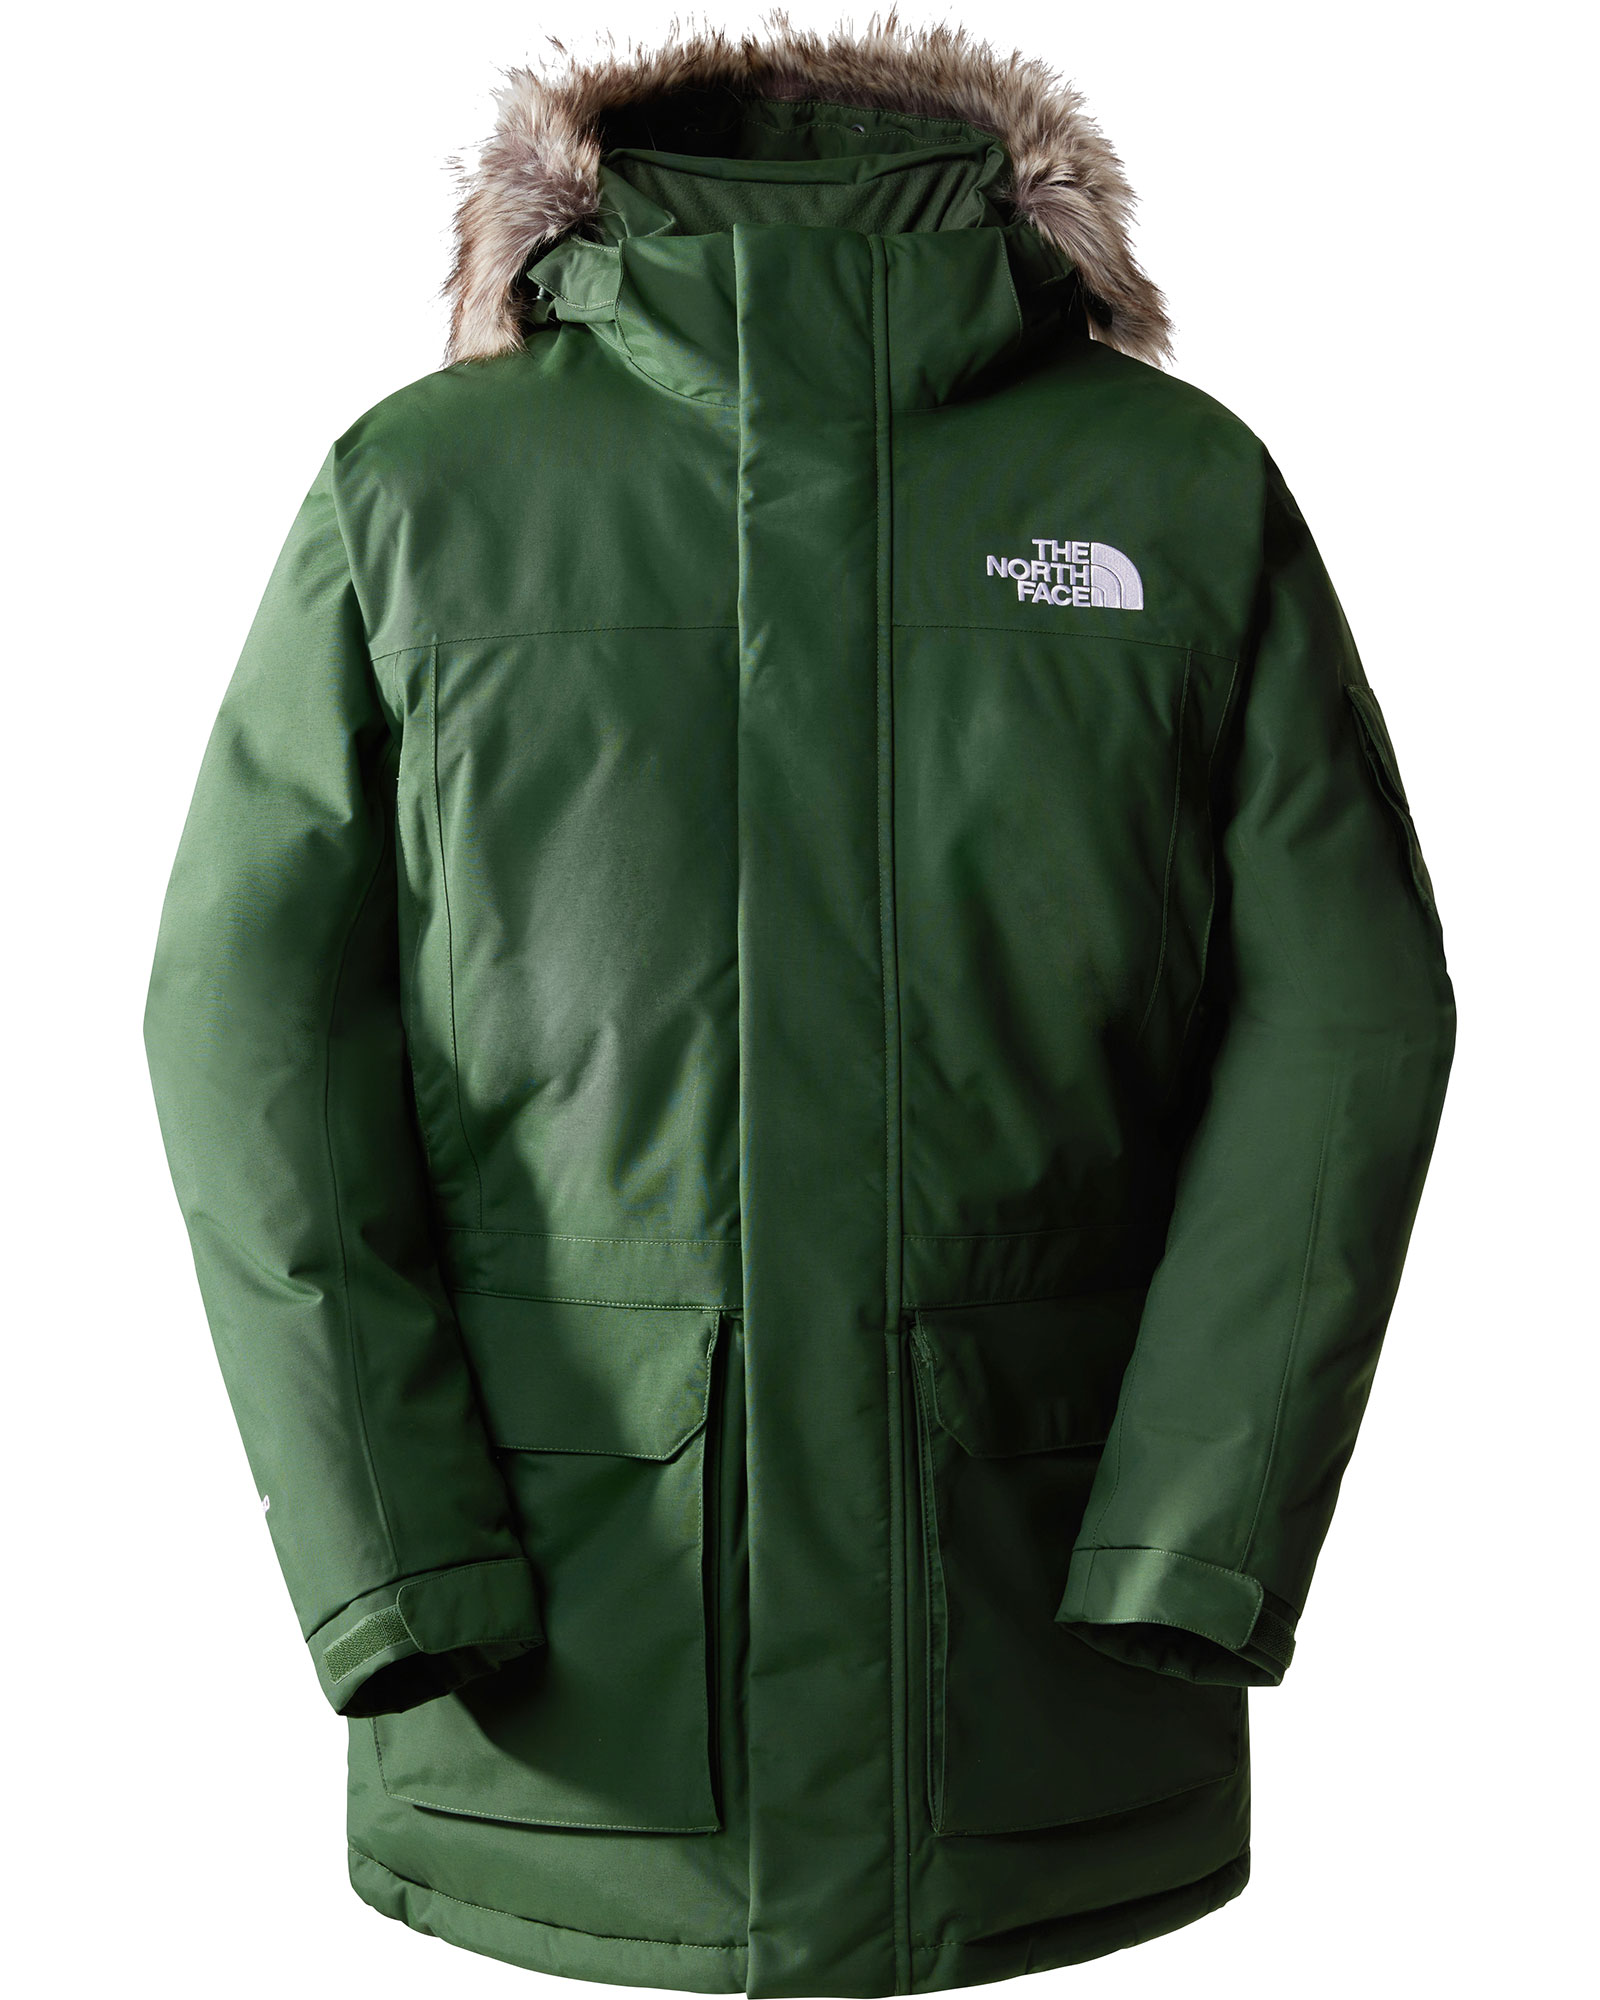 The North Face McMurdo Men’s Jacket - Pine Needle S